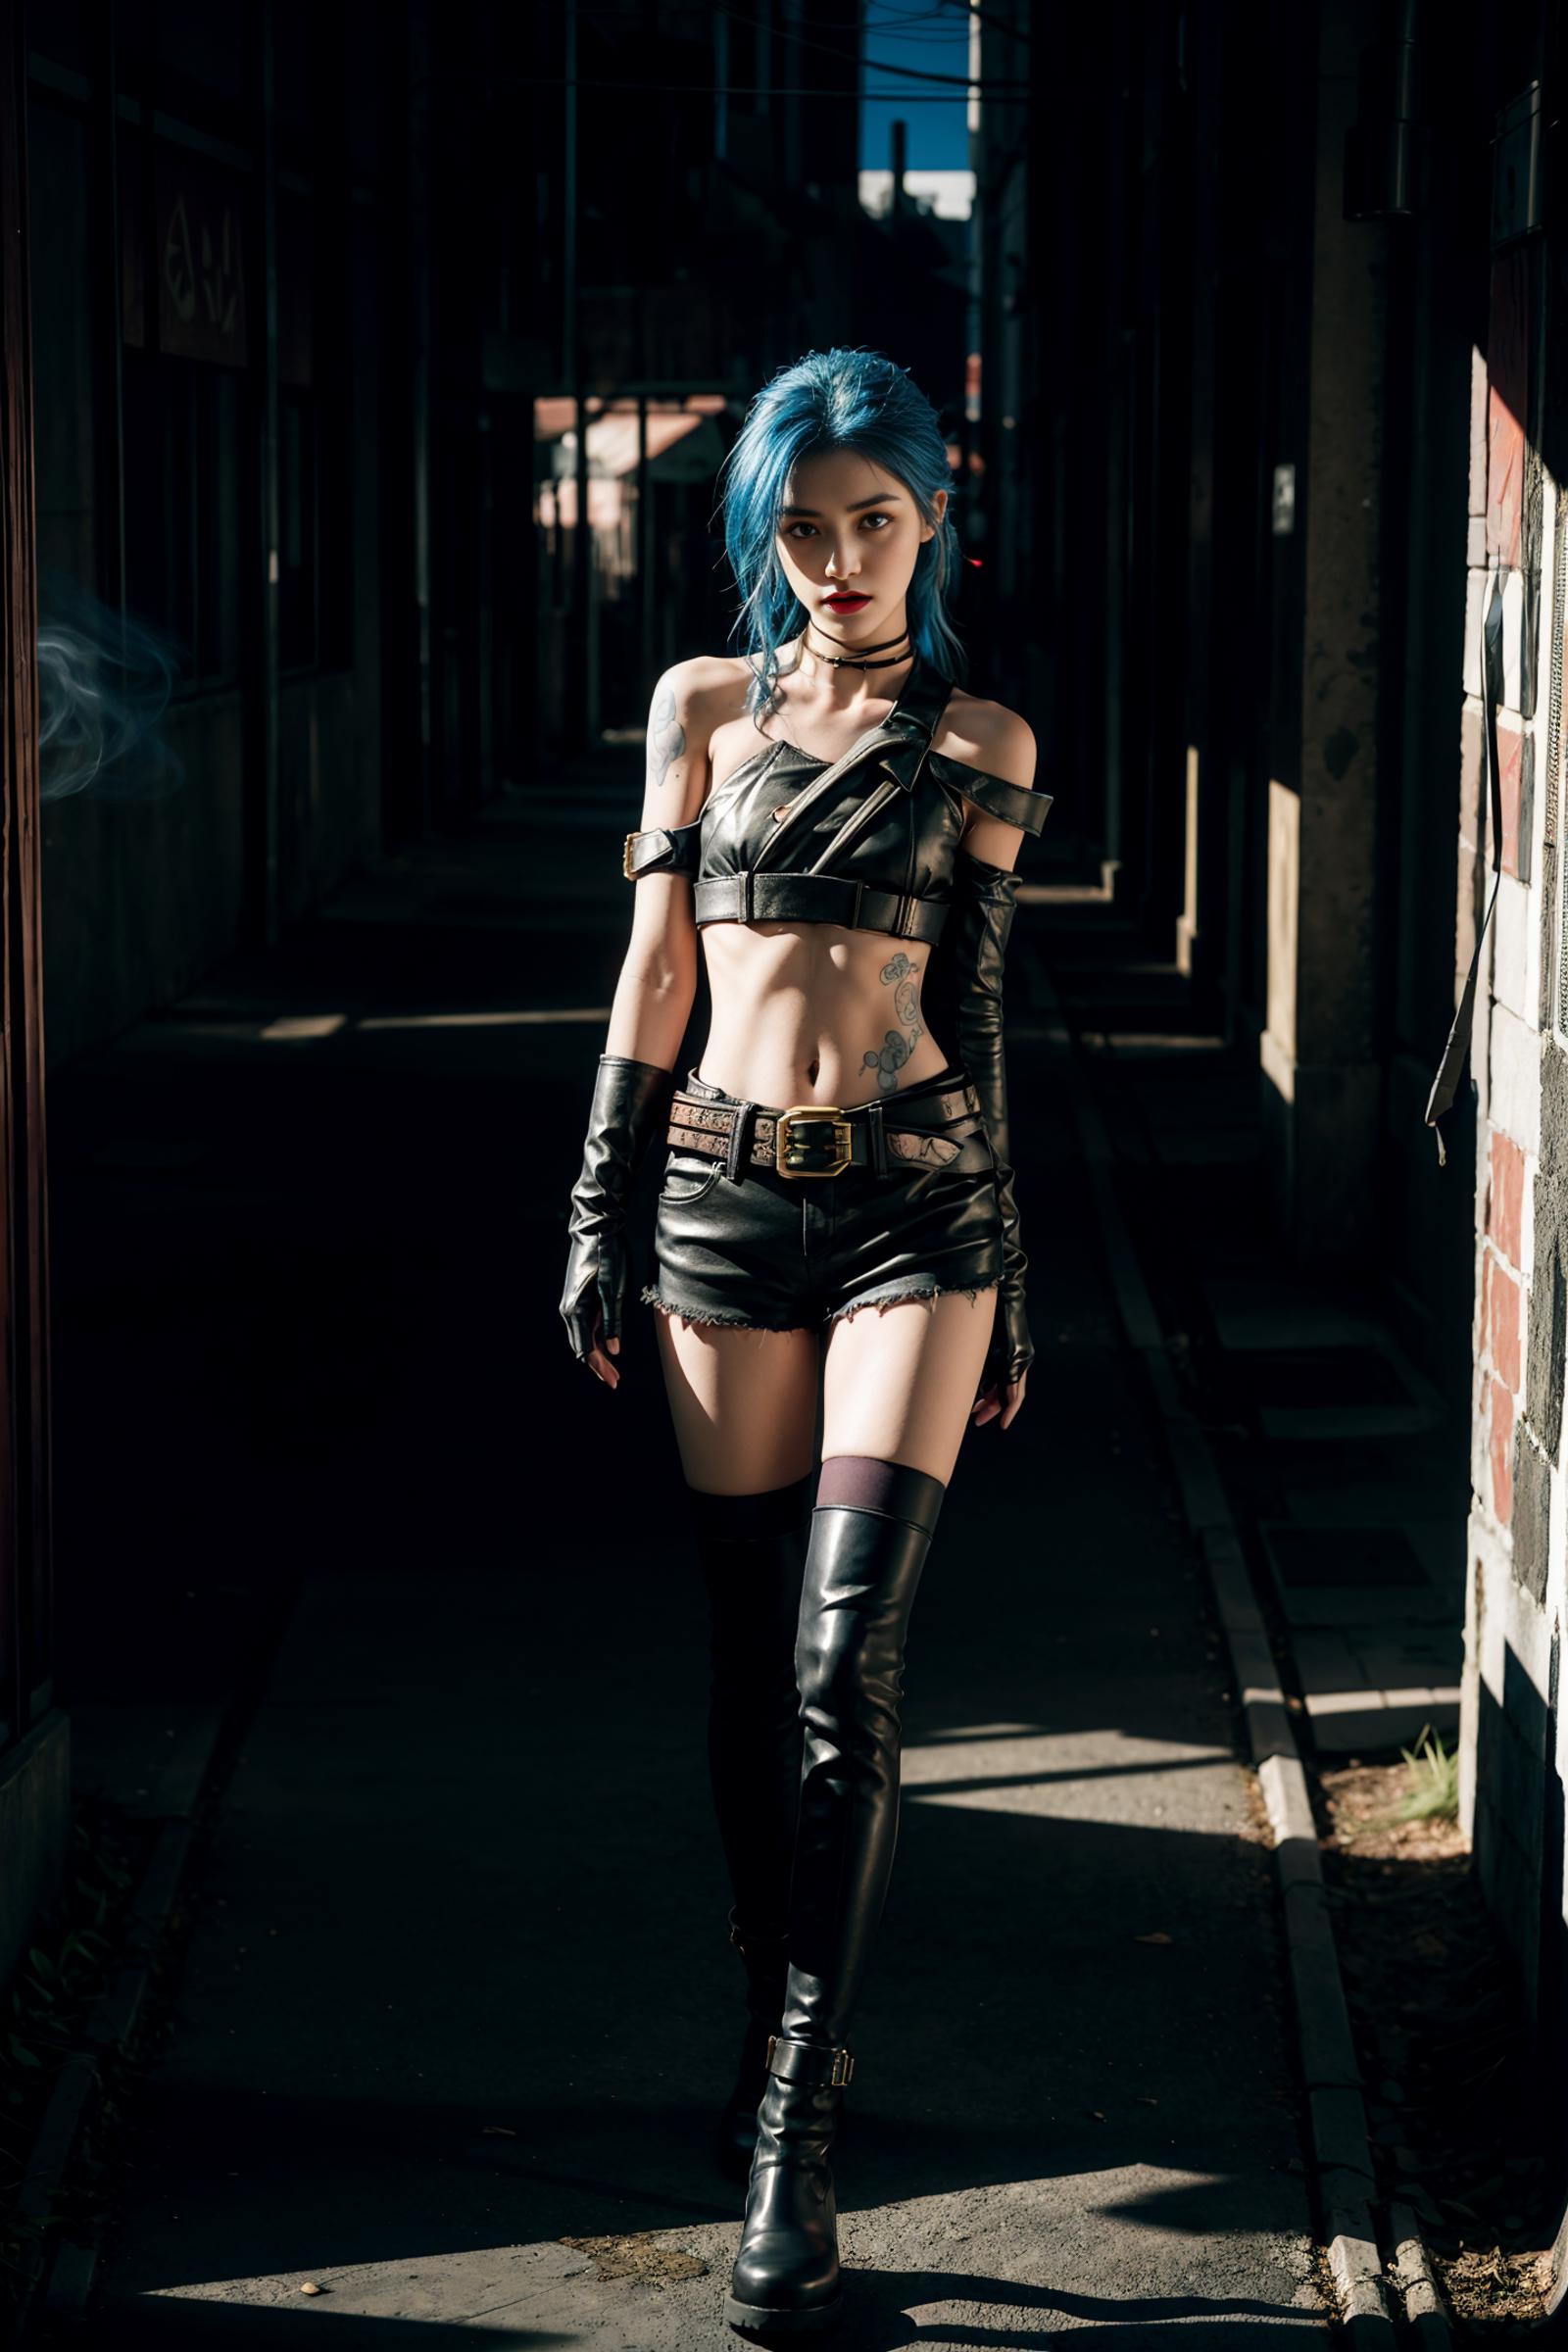 Jinx League of legends image by PinkSao